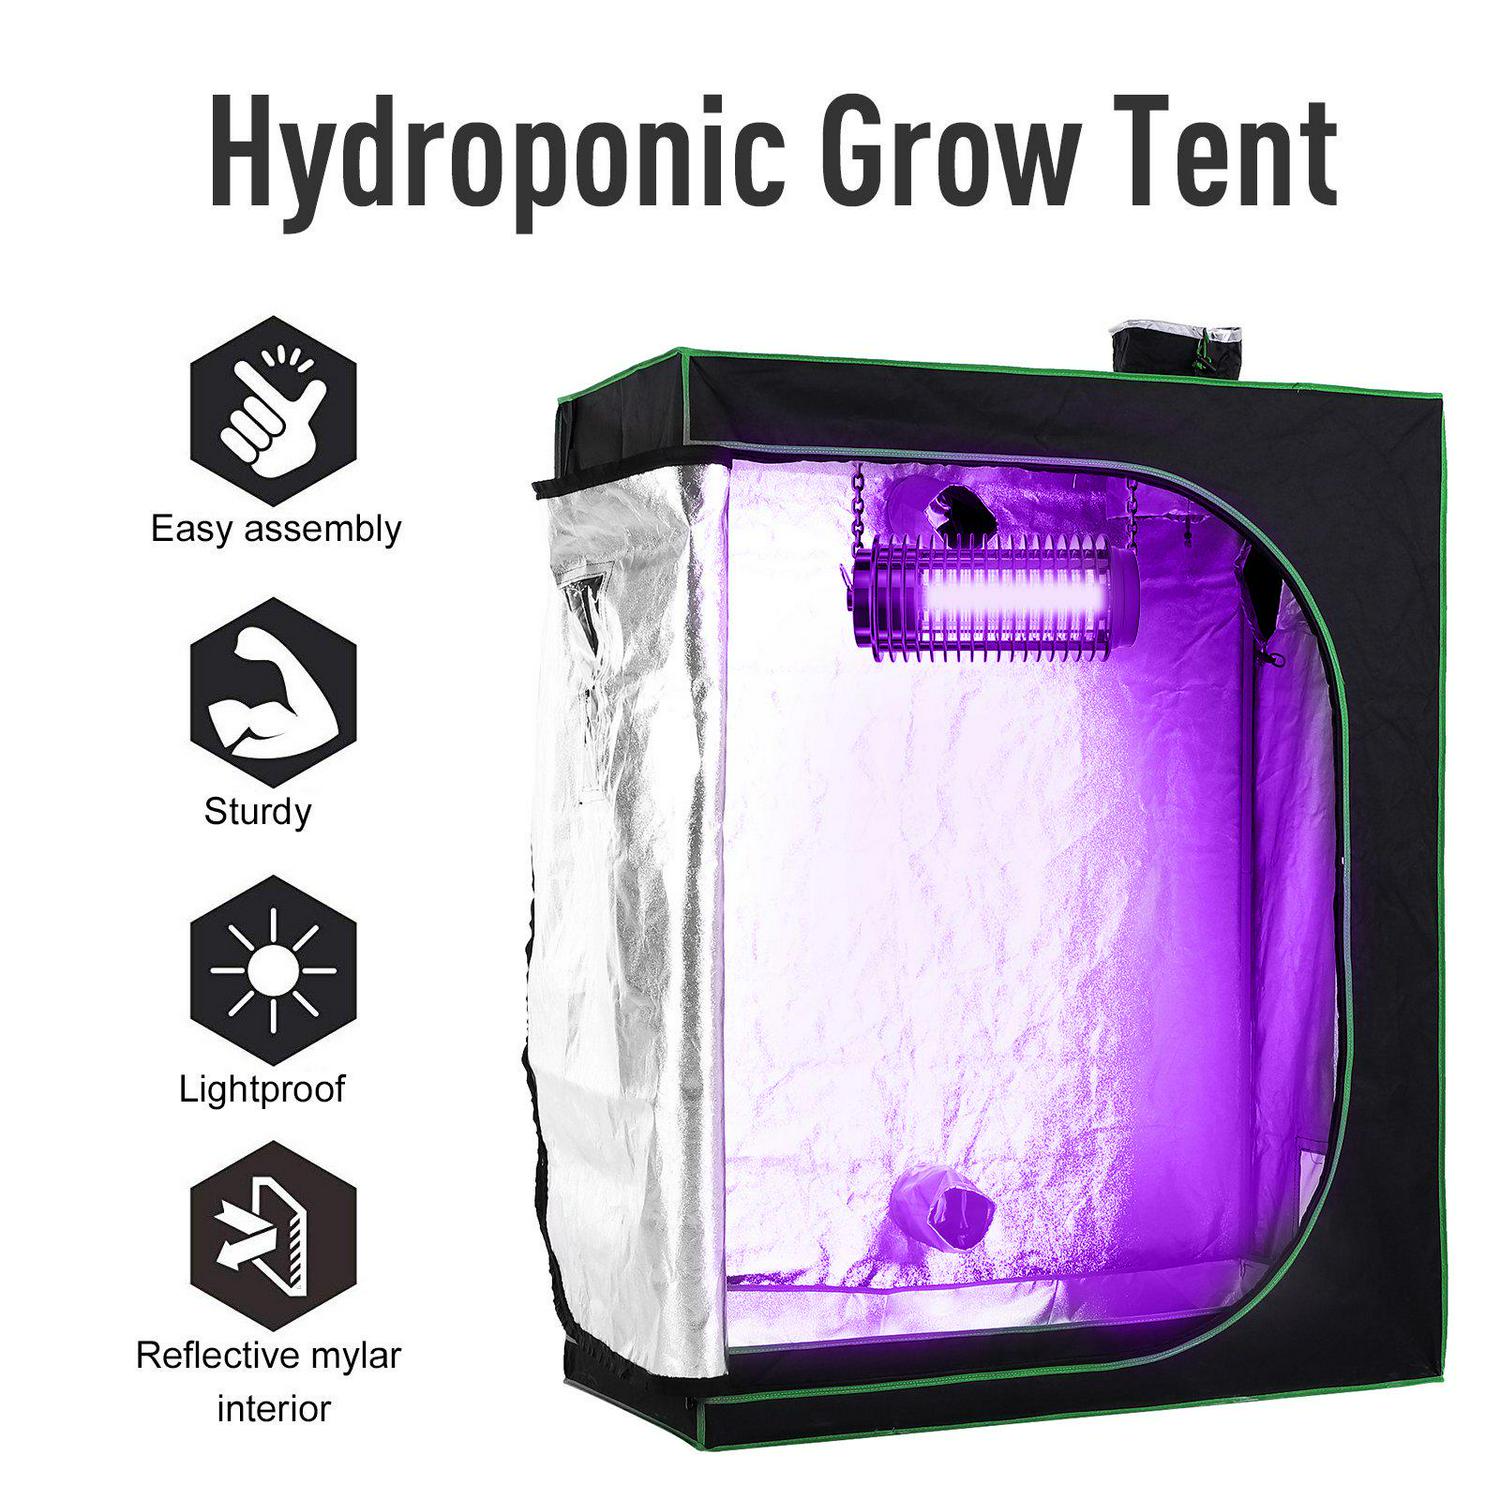 Hydroponic Plant Grow Tent Canopy Indoor Reflective Mylar Green Room 600D Oxford 120L X60W X150Hcm Silver